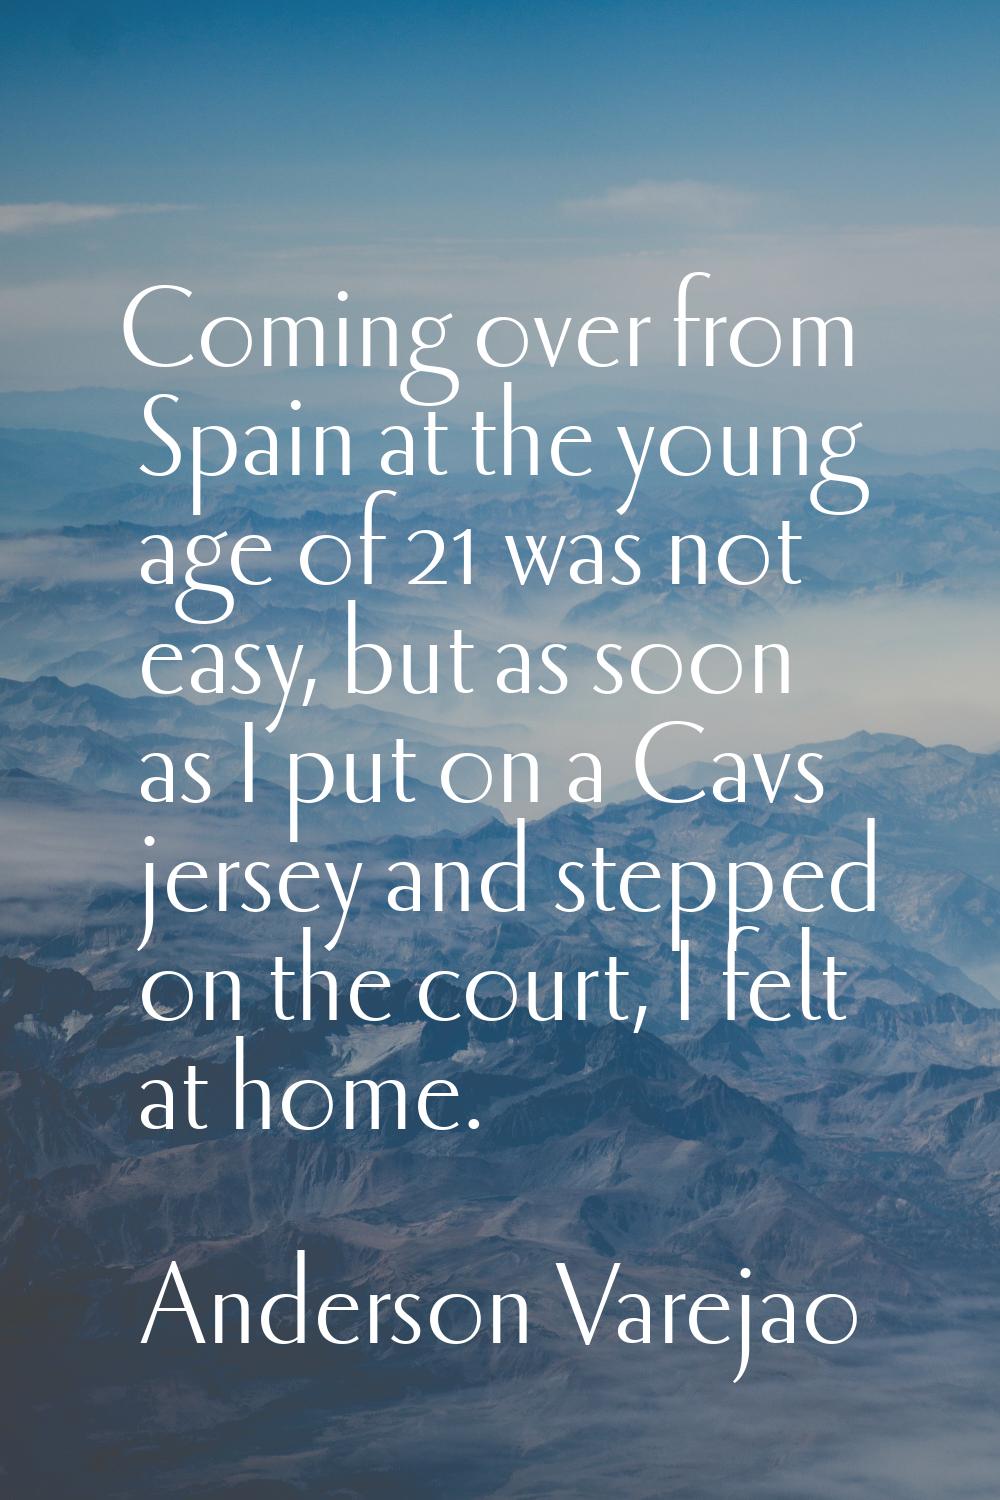 Coming over from Spain at the young age of 21 was not easy, but as soon as I put on a Cavs jersey a